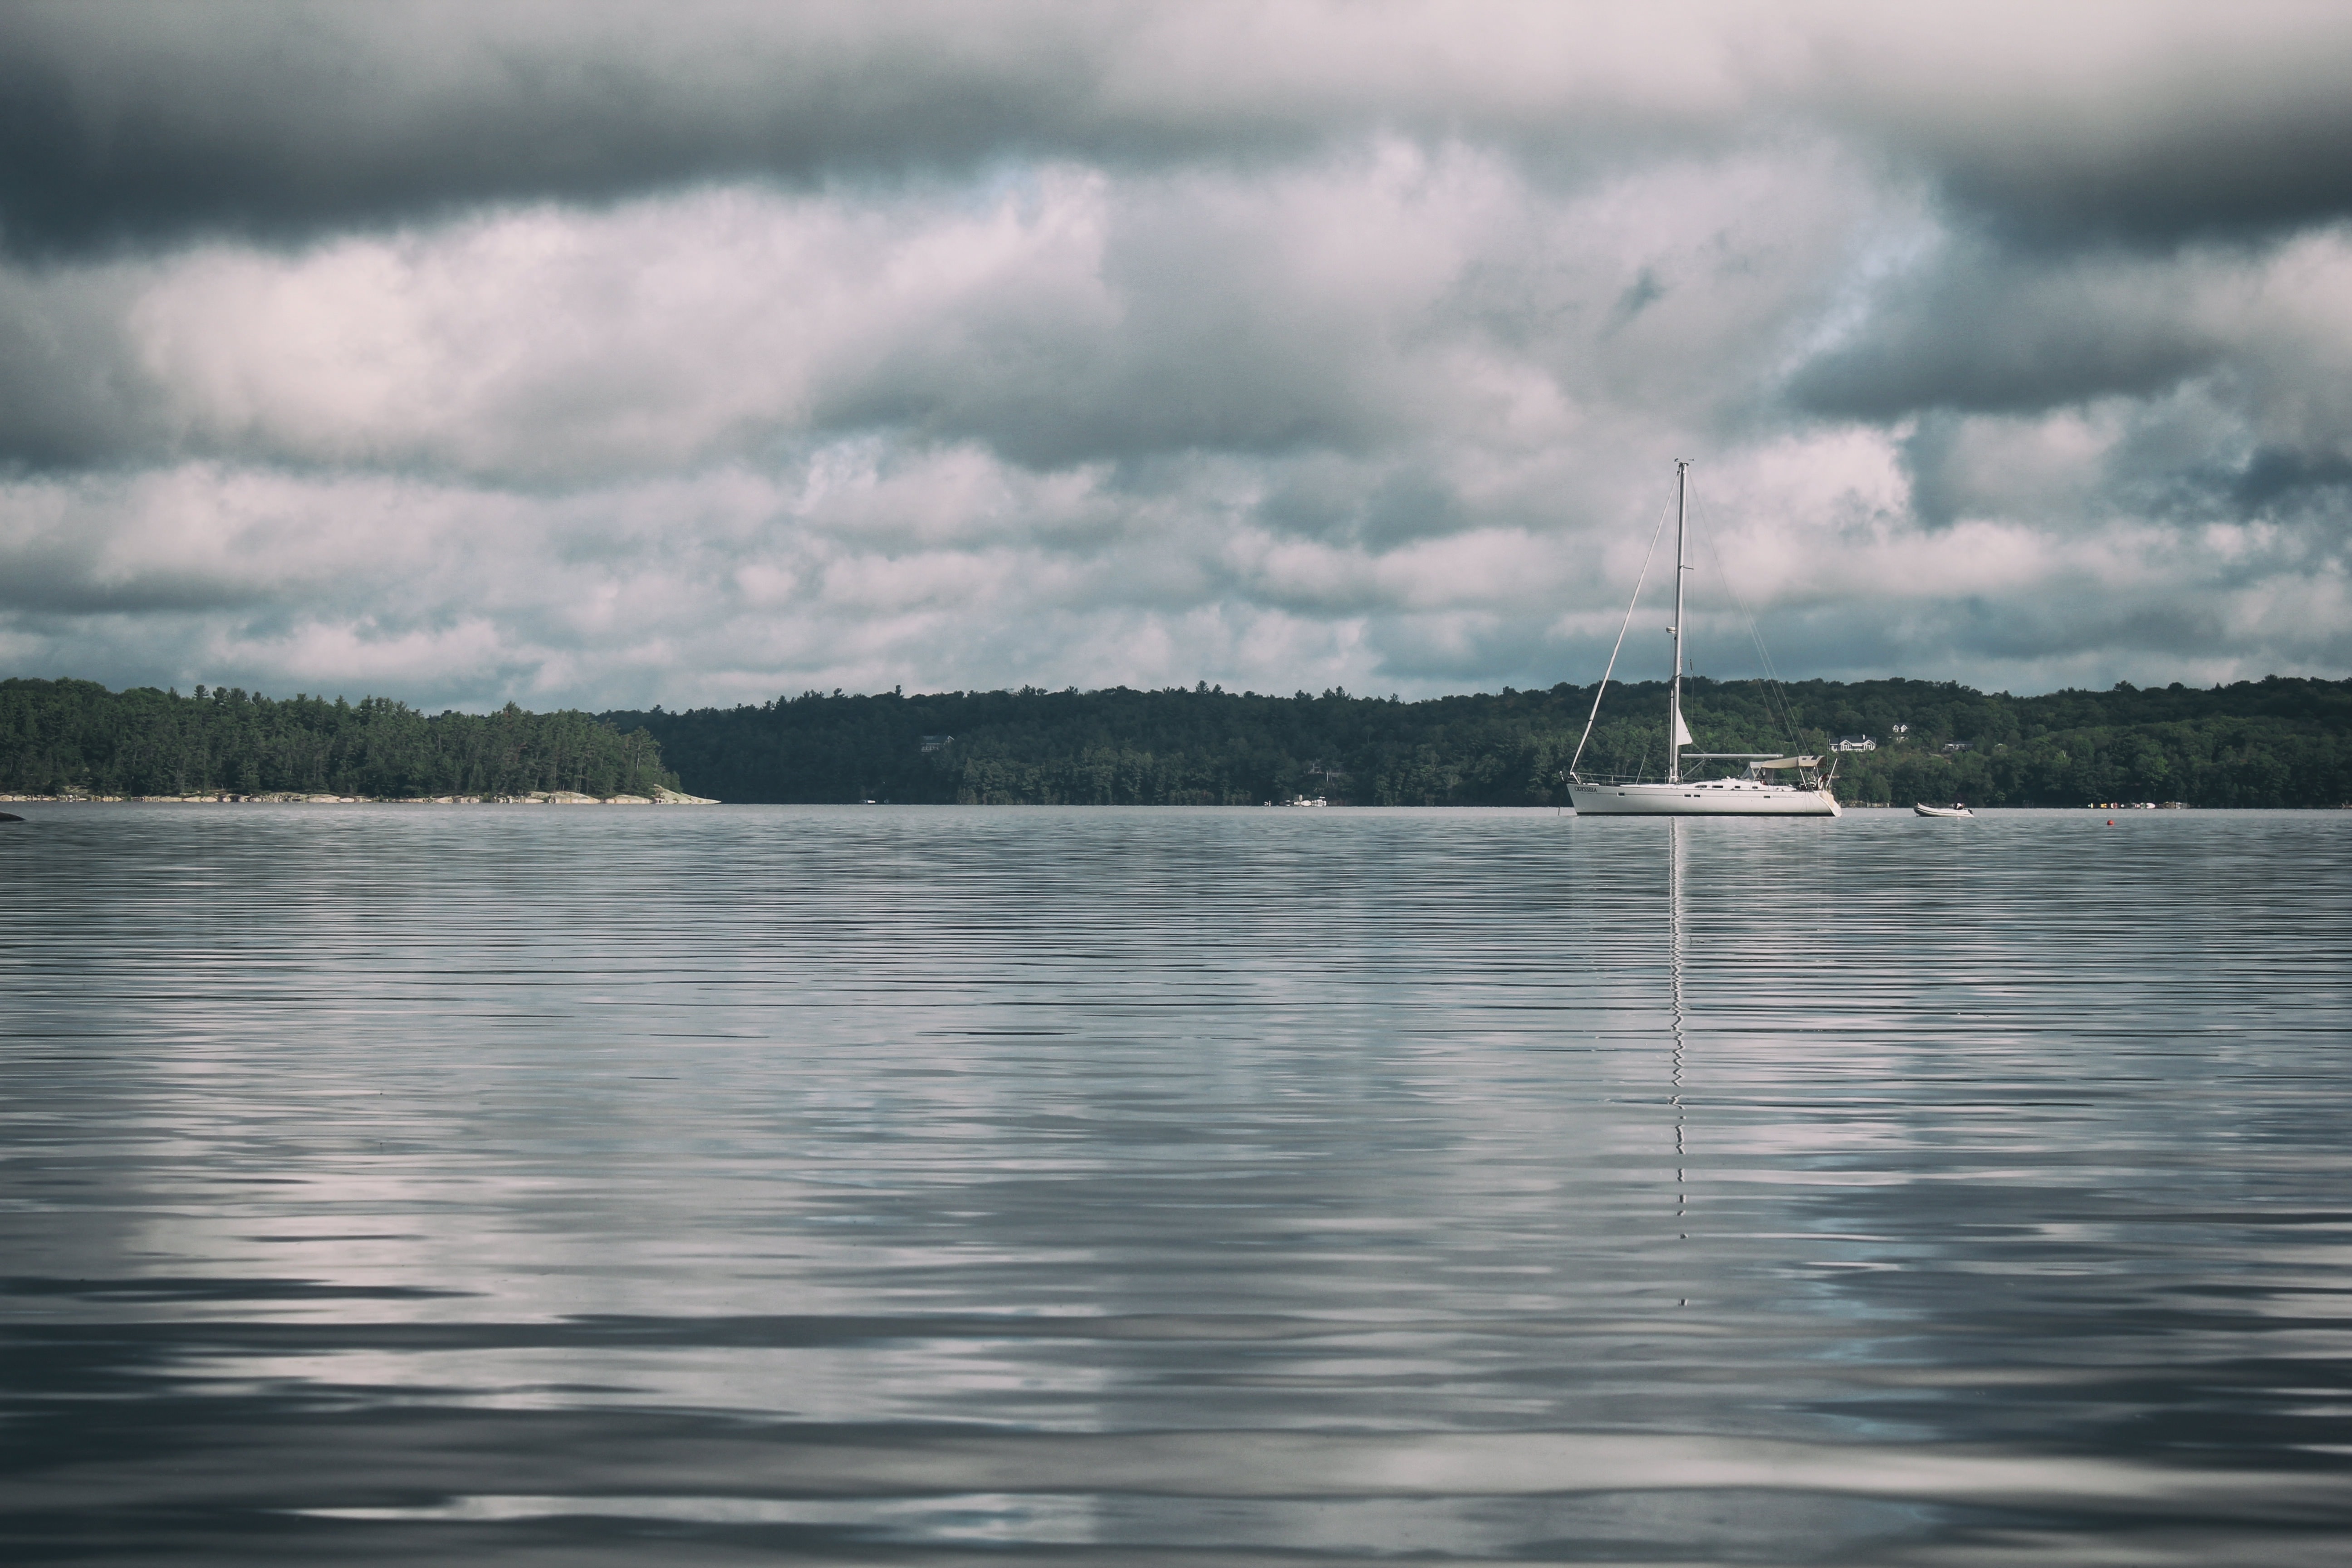 White Sailboat Across the Body of Water Under White and Gray Cloudy Sky